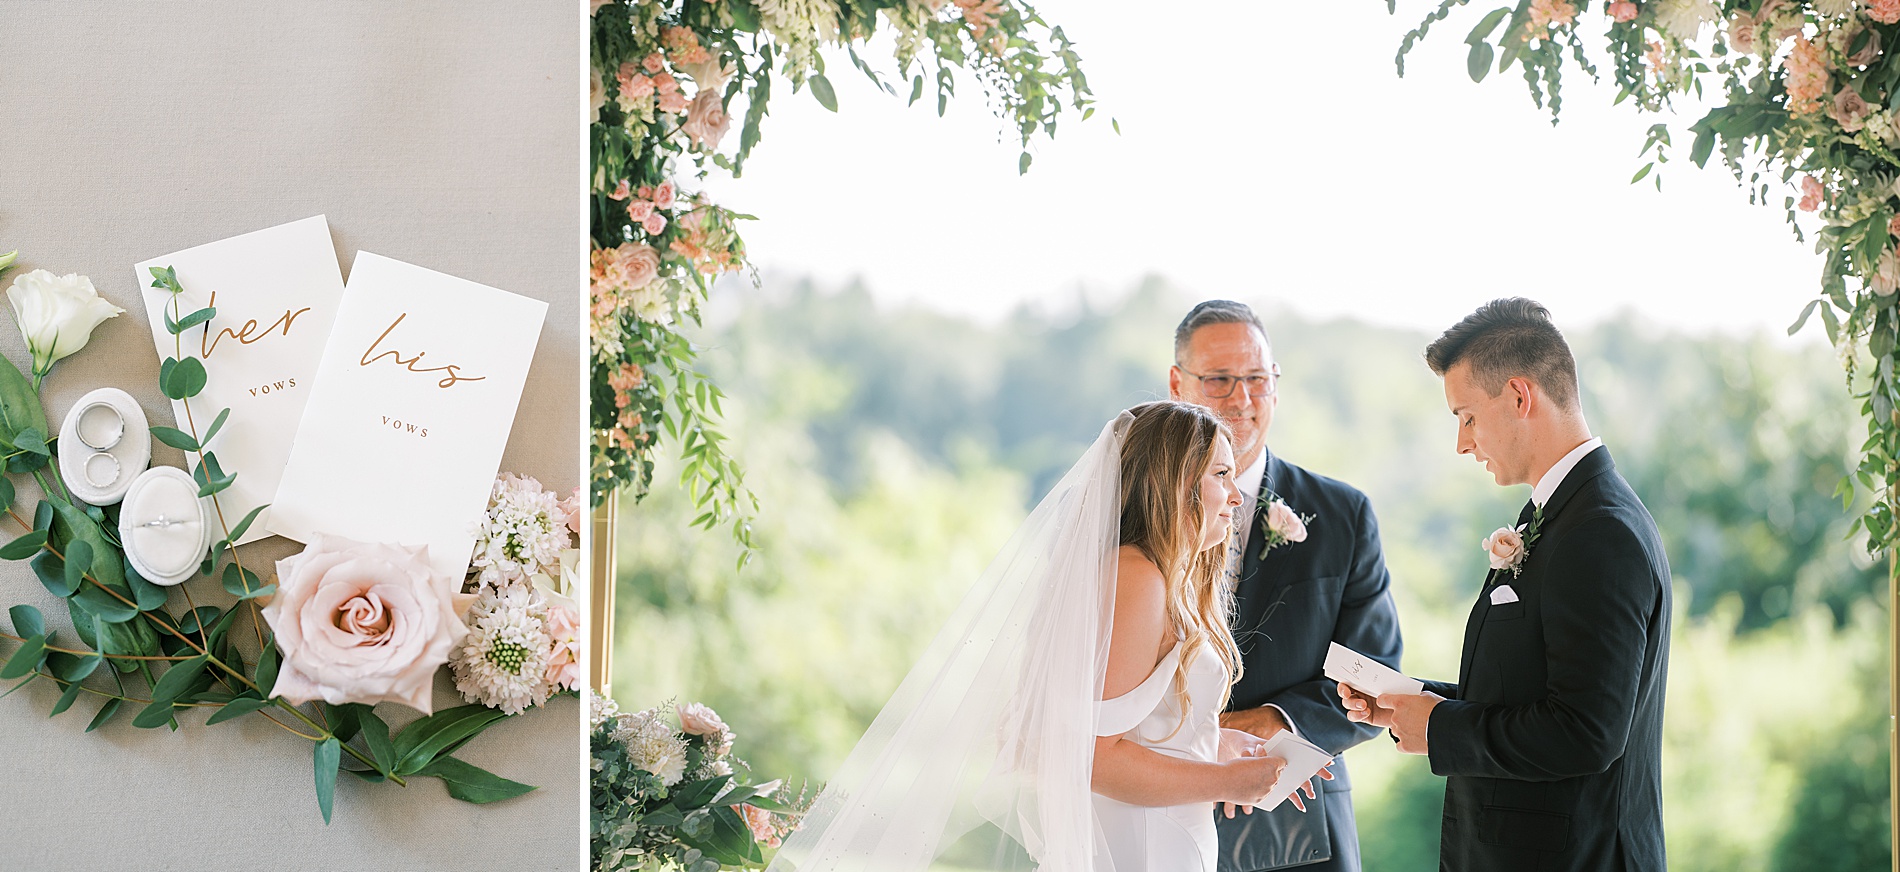 couple exchange vows at Southern Harvest Hollow Wedding